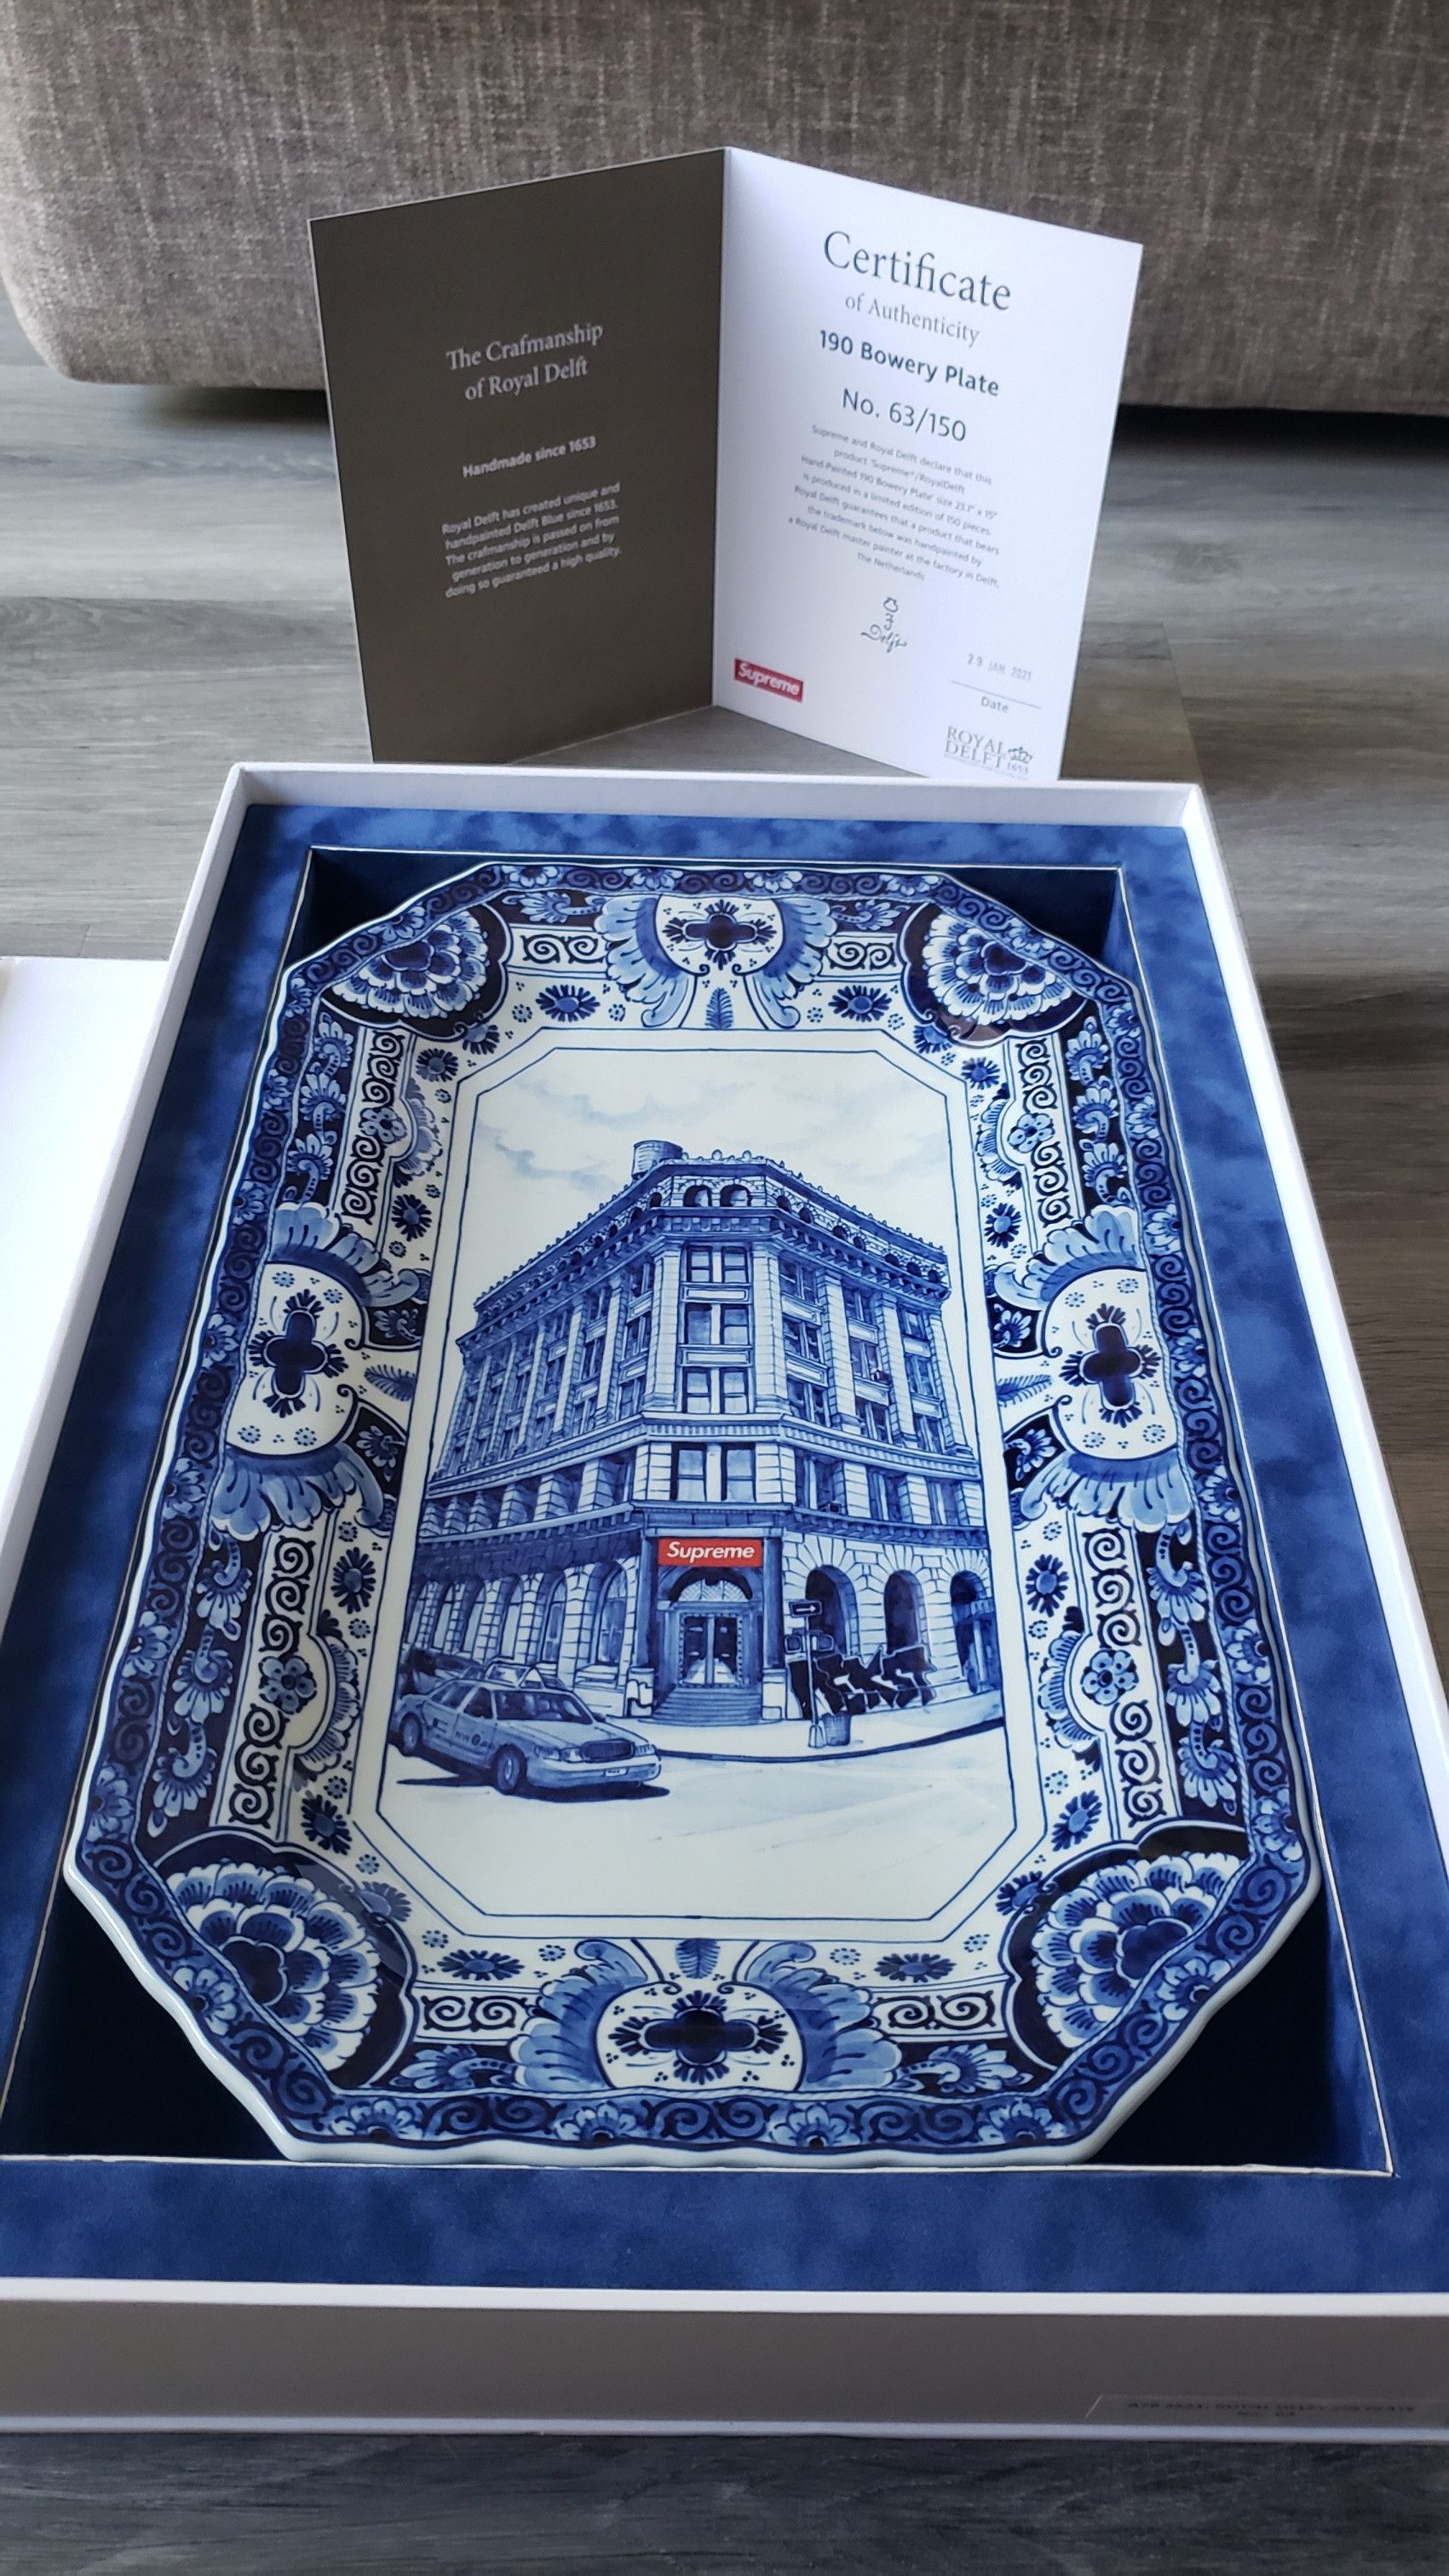 Supreme Supreme Royal Delft Hand-Painted 190 Bowery Large Plate